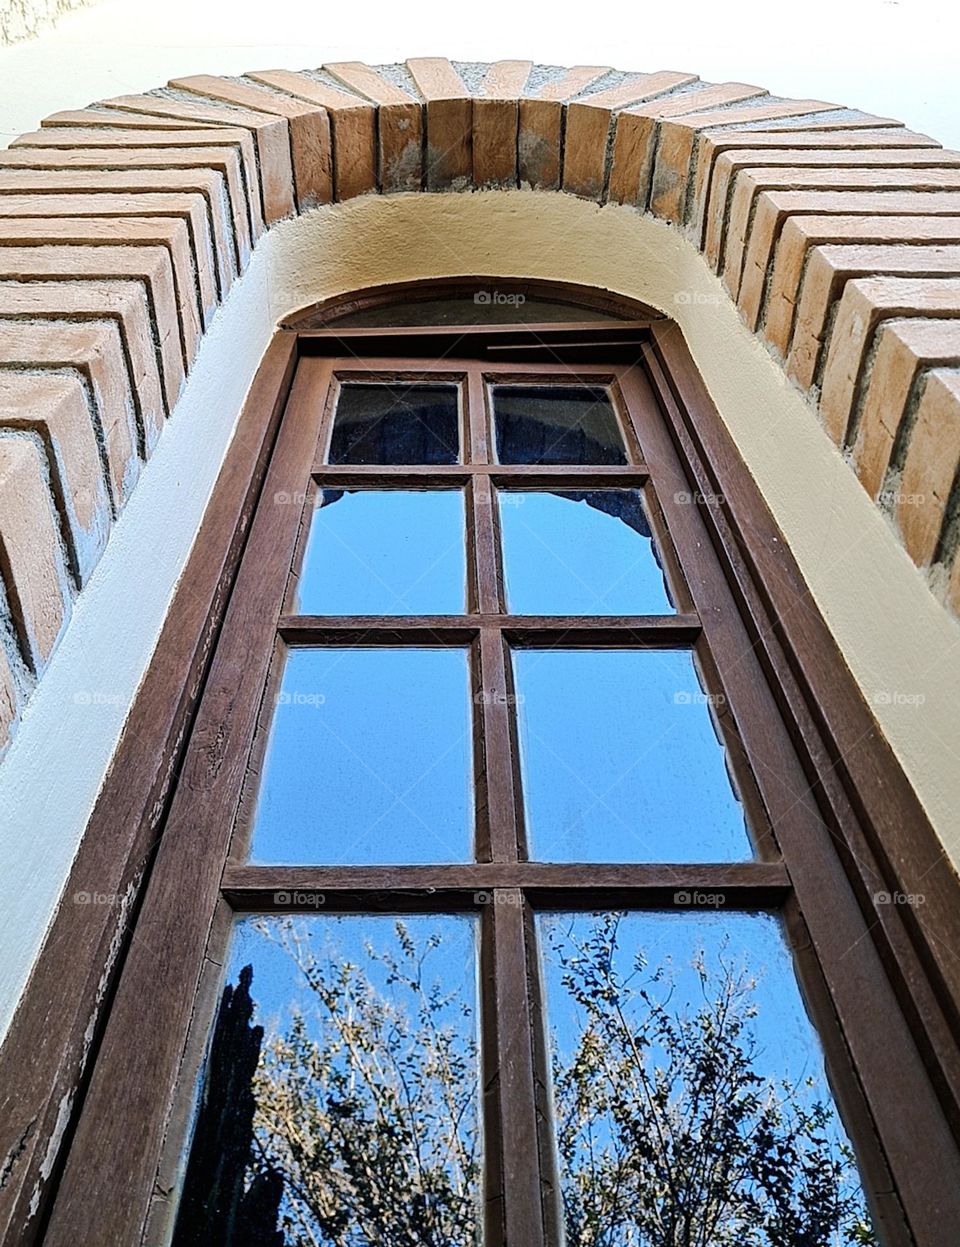 From the ground up: Wooden window with glass reflecting the sky and plants.